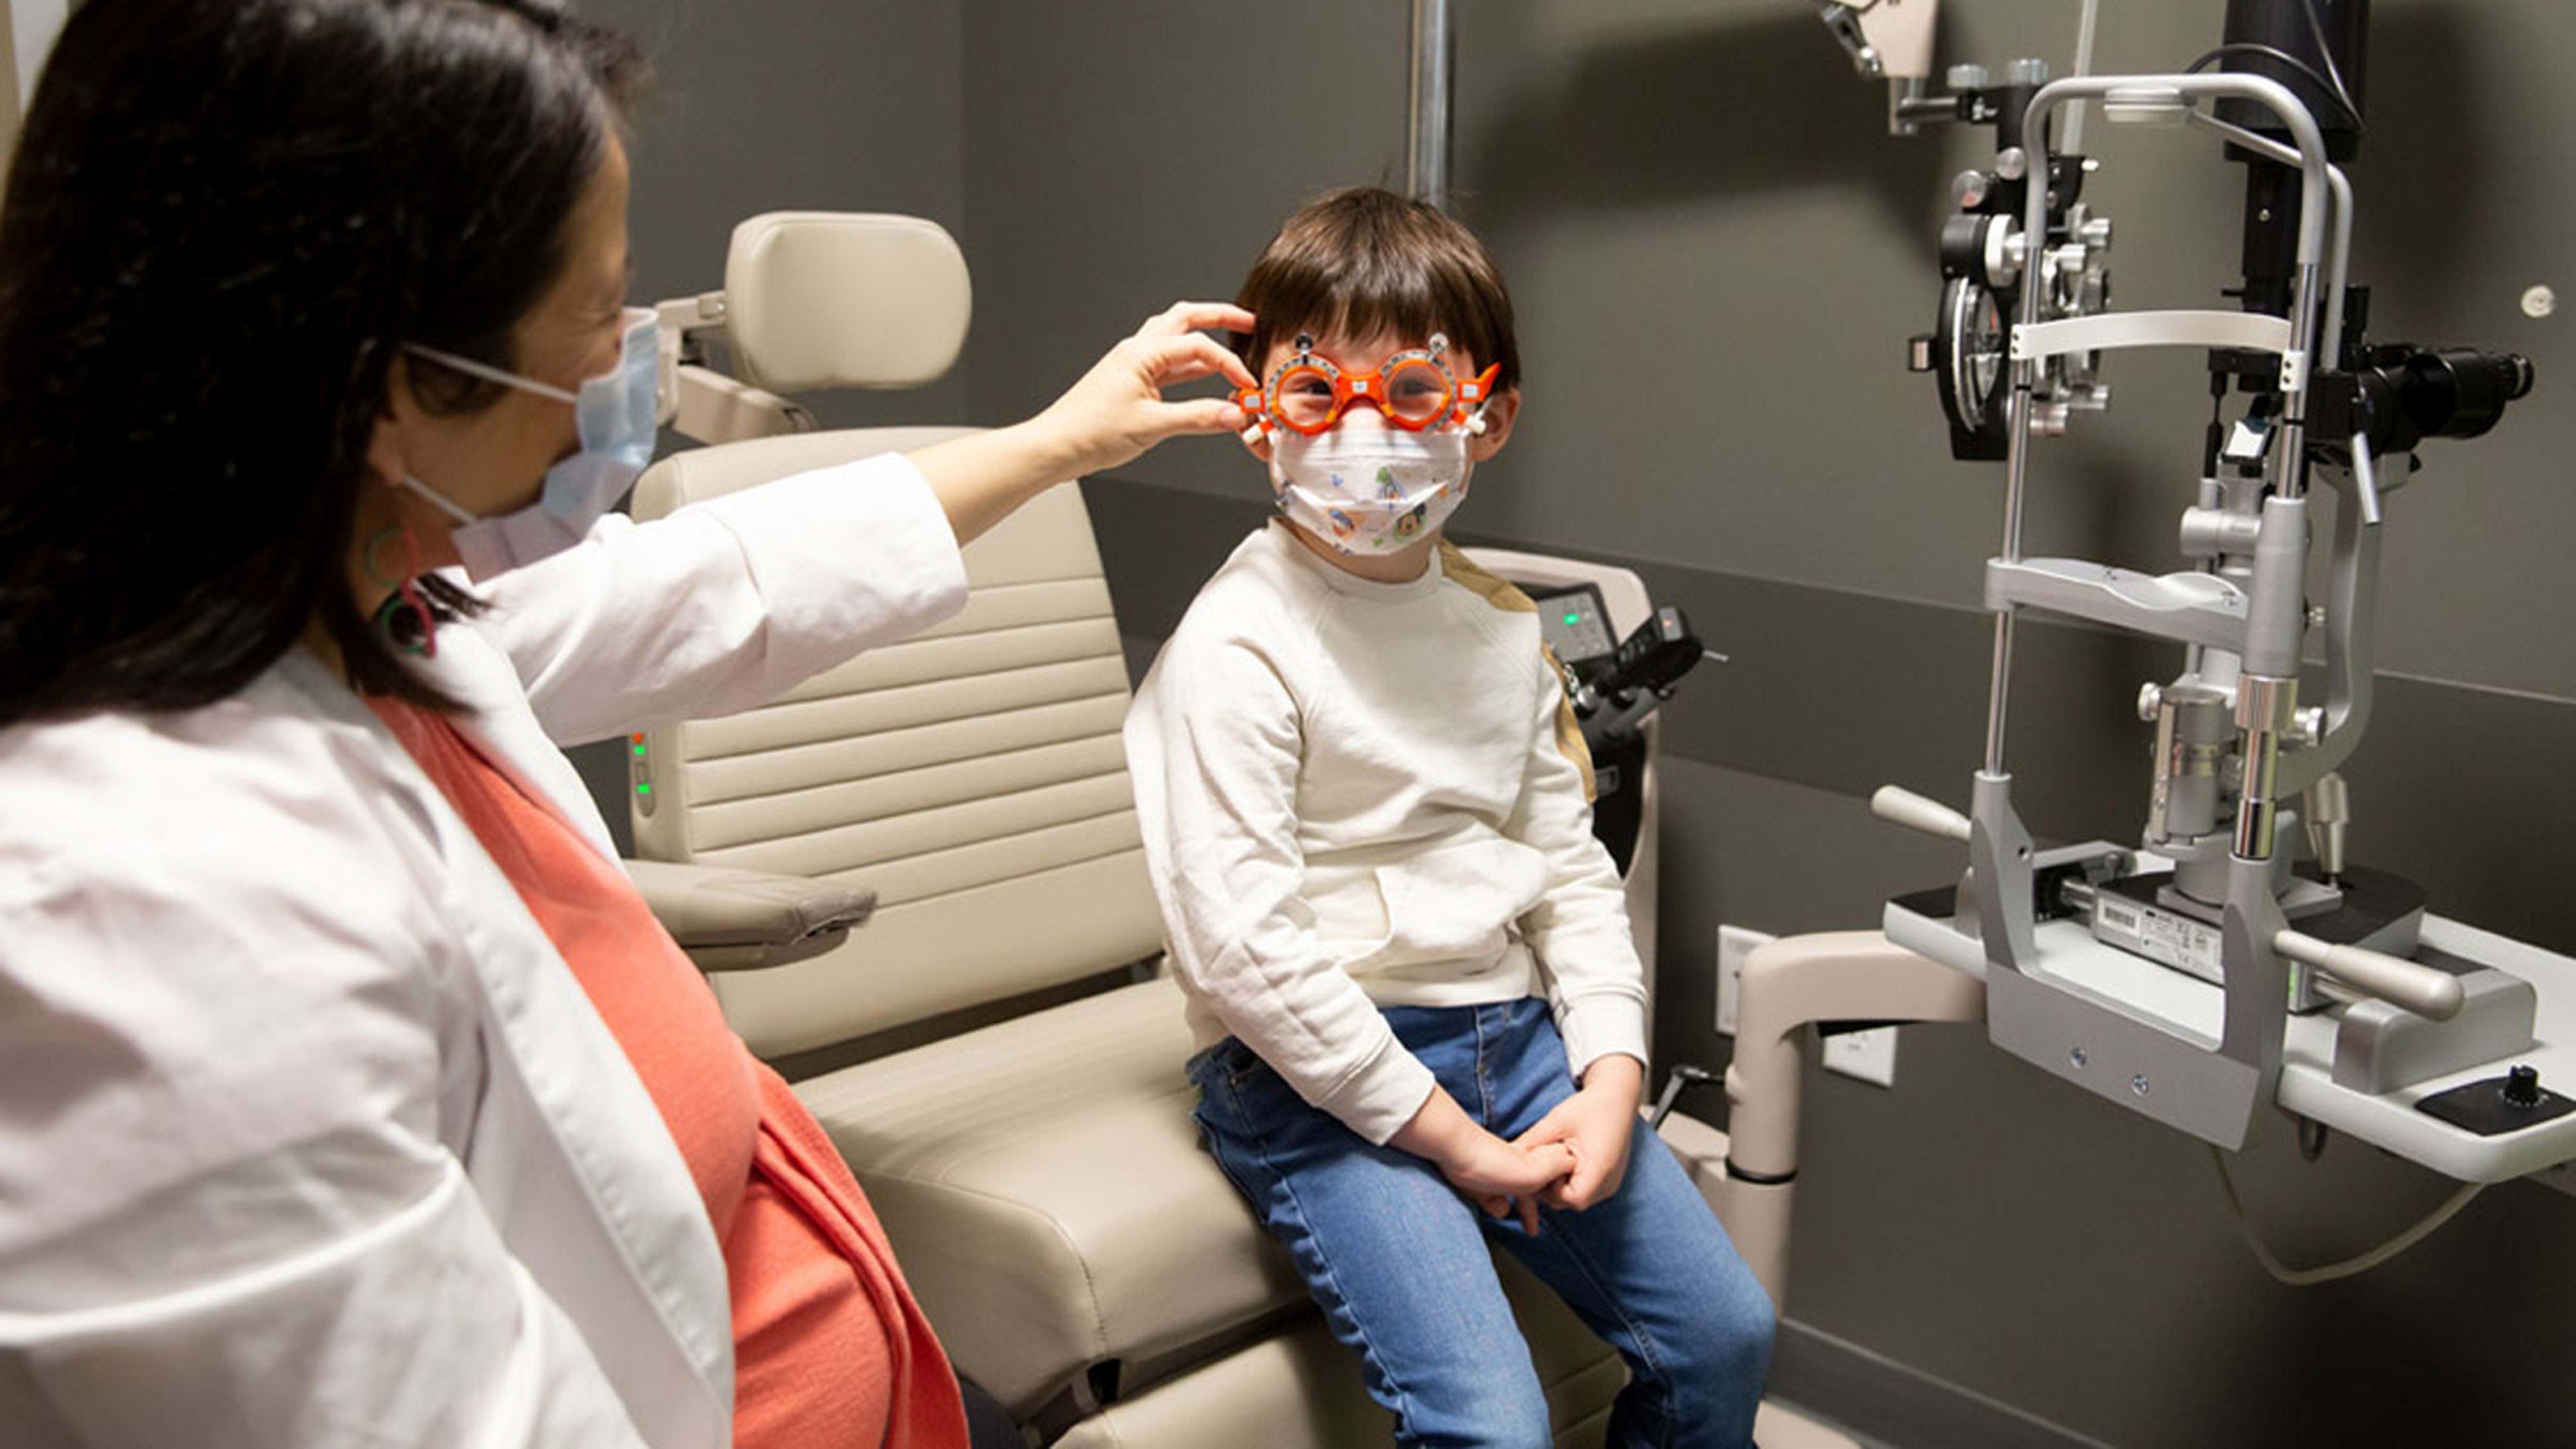 This eye clinic was designed specifically for people with low vision